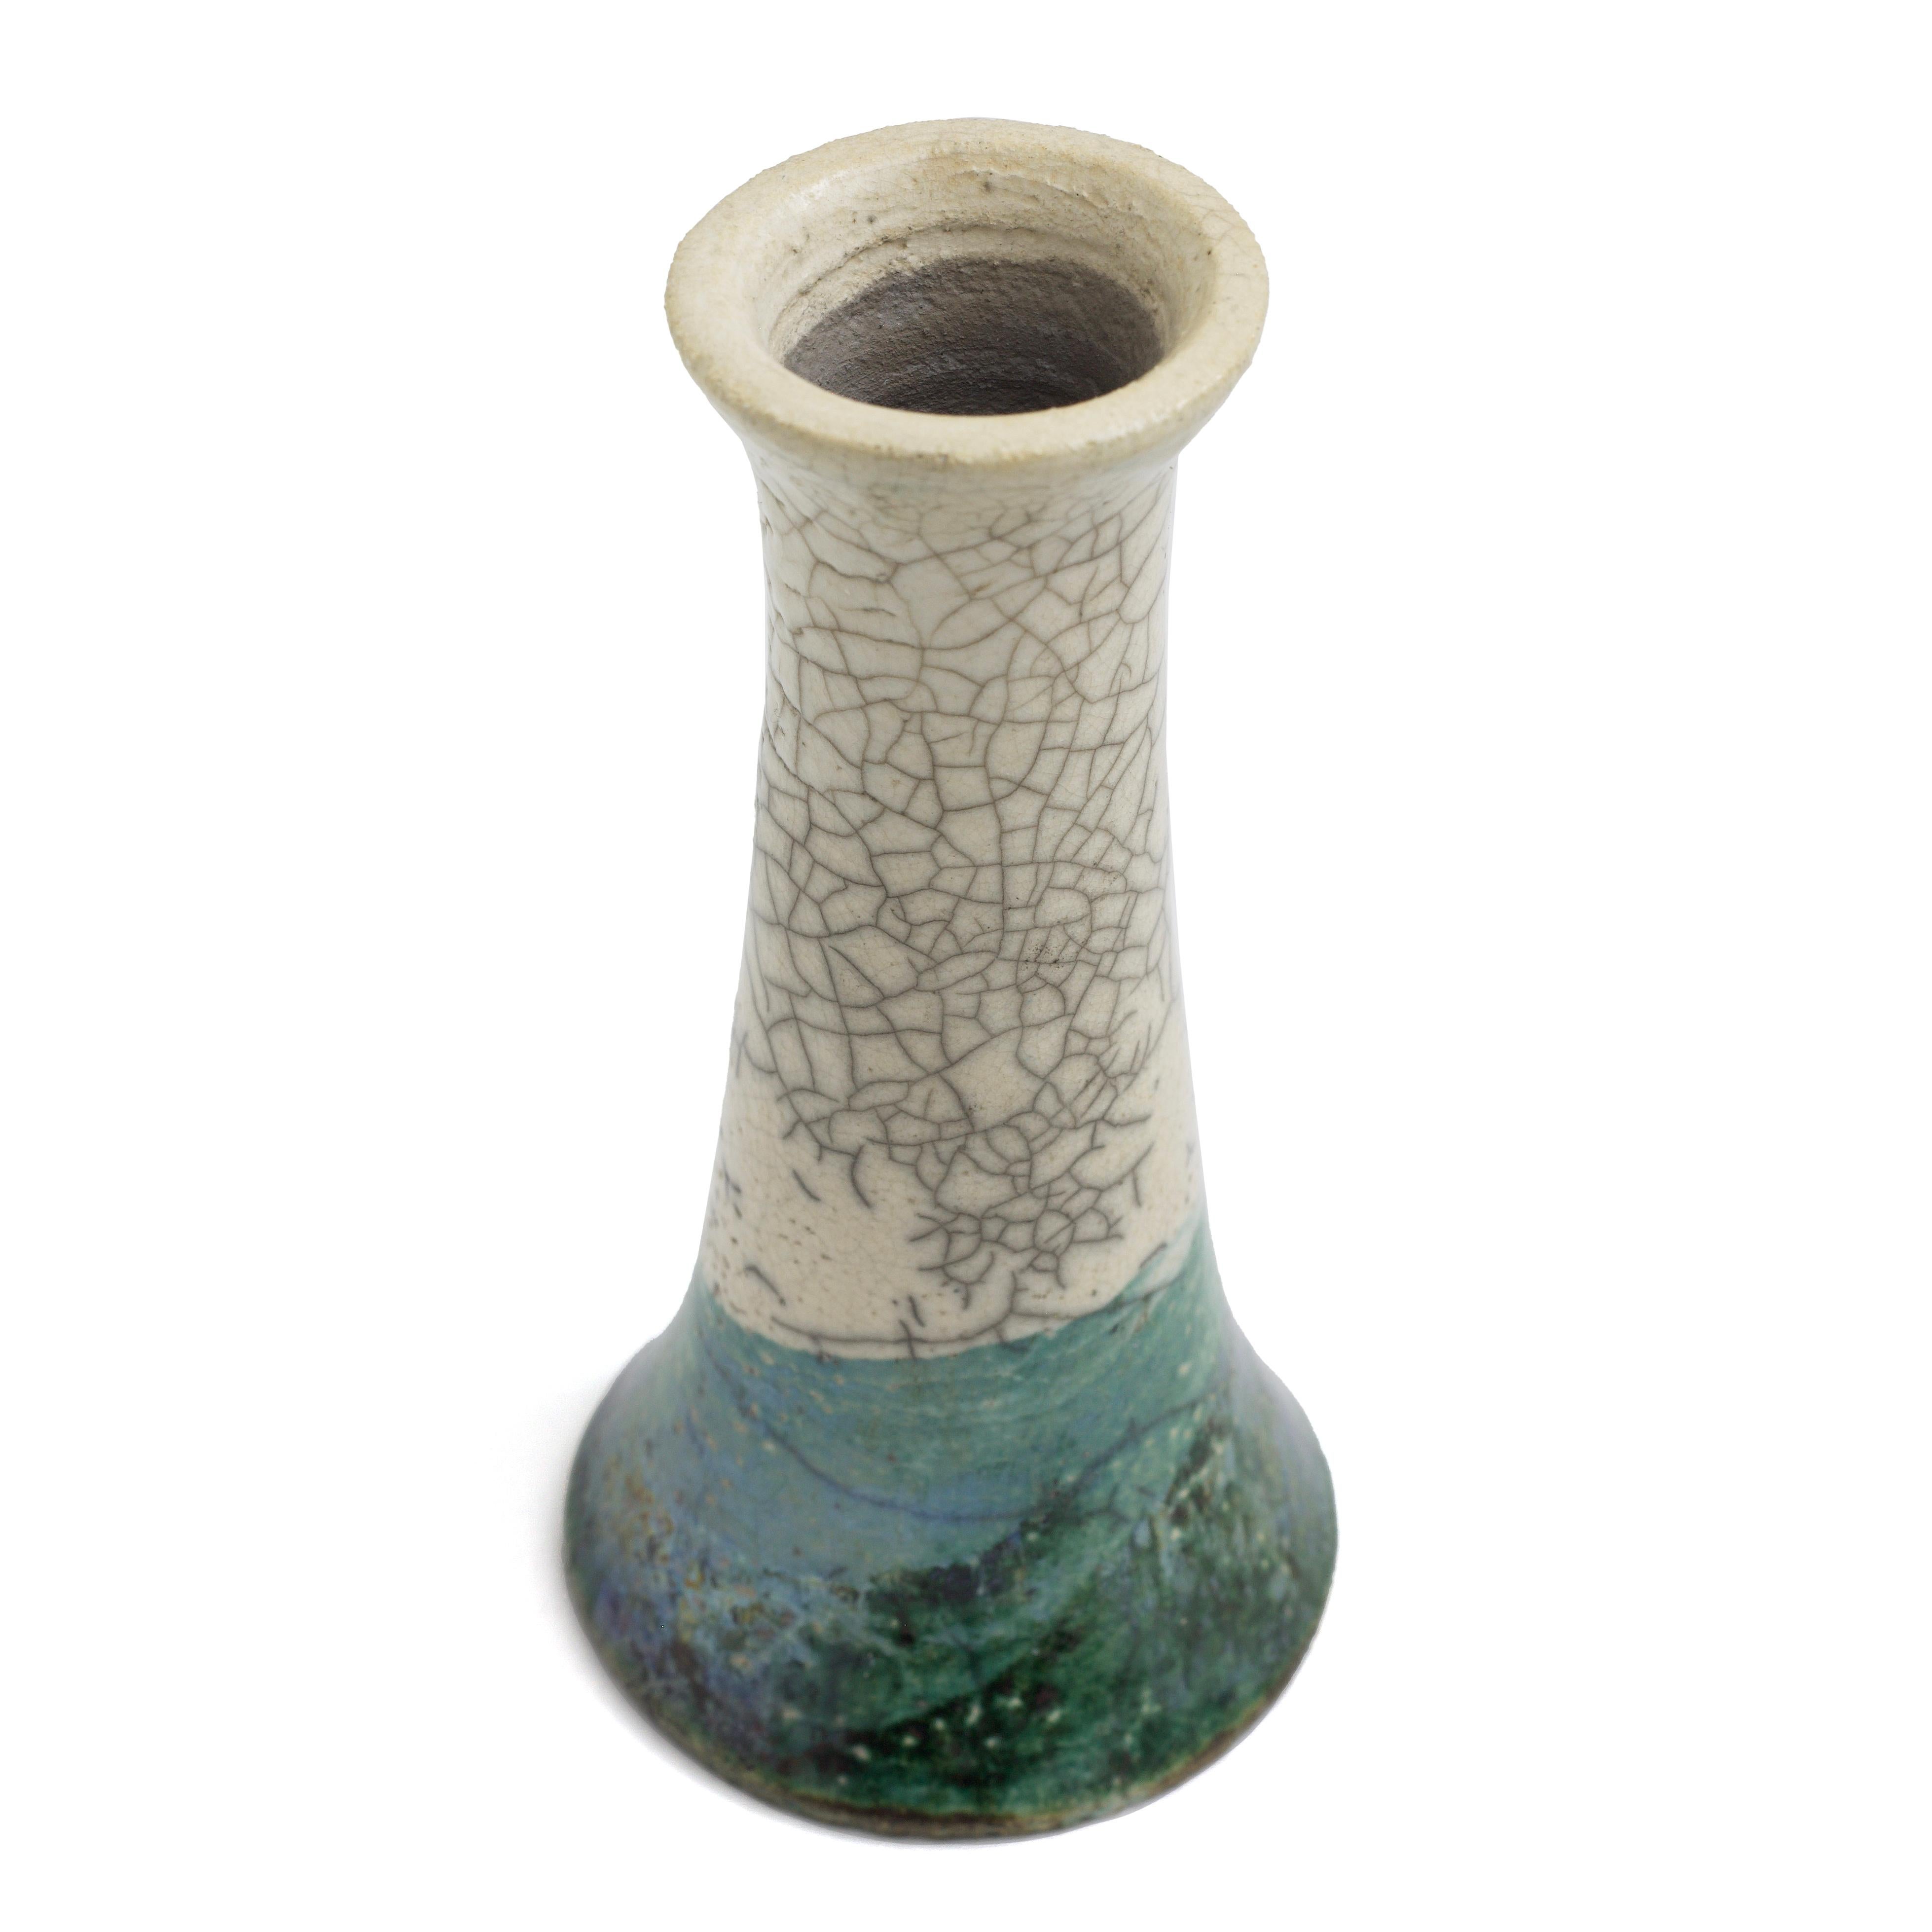 Stelo Flow Candle Holders

Captivating hues of bold visual impact make these two candle holders one-off pieces of unprecedented artistic charm. A stunning Raku crakle' effect on the top and a cut at the bottom by a 